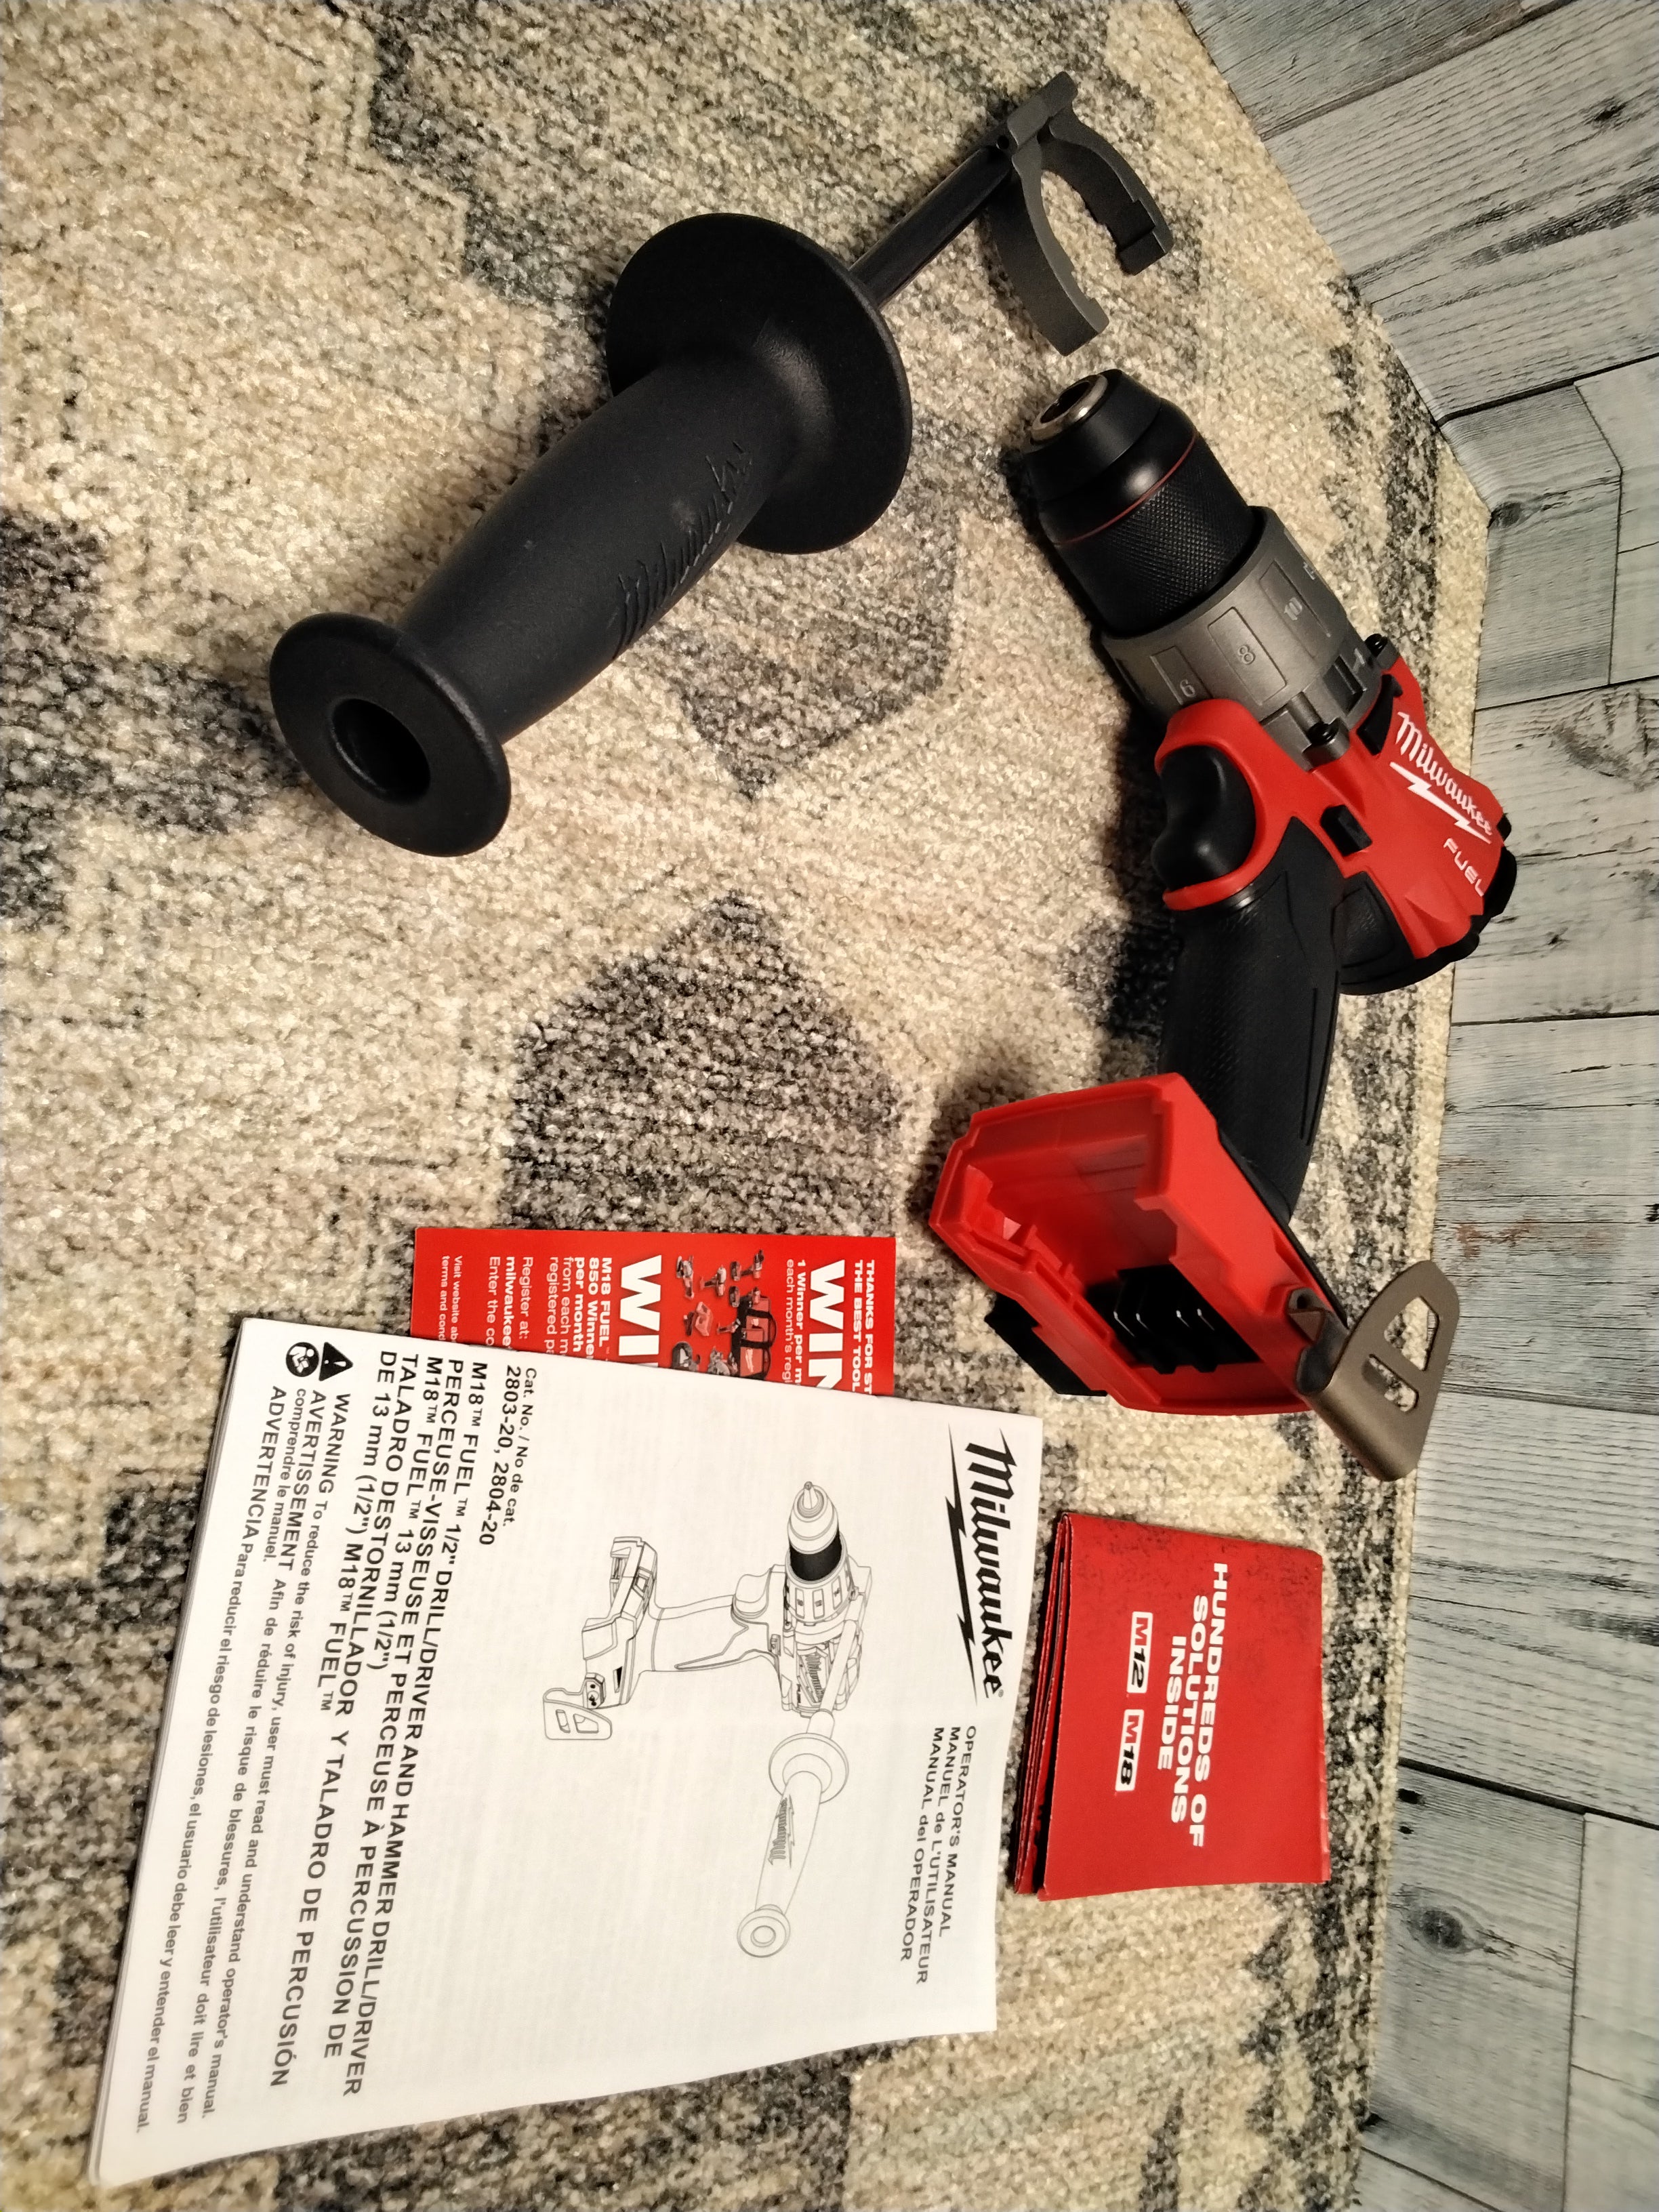 Milwaukee M18 FUEL 1/2 in. Hammer Drill (Tool Only) Tool-Peak Torque = 1,200 (7931541684462)